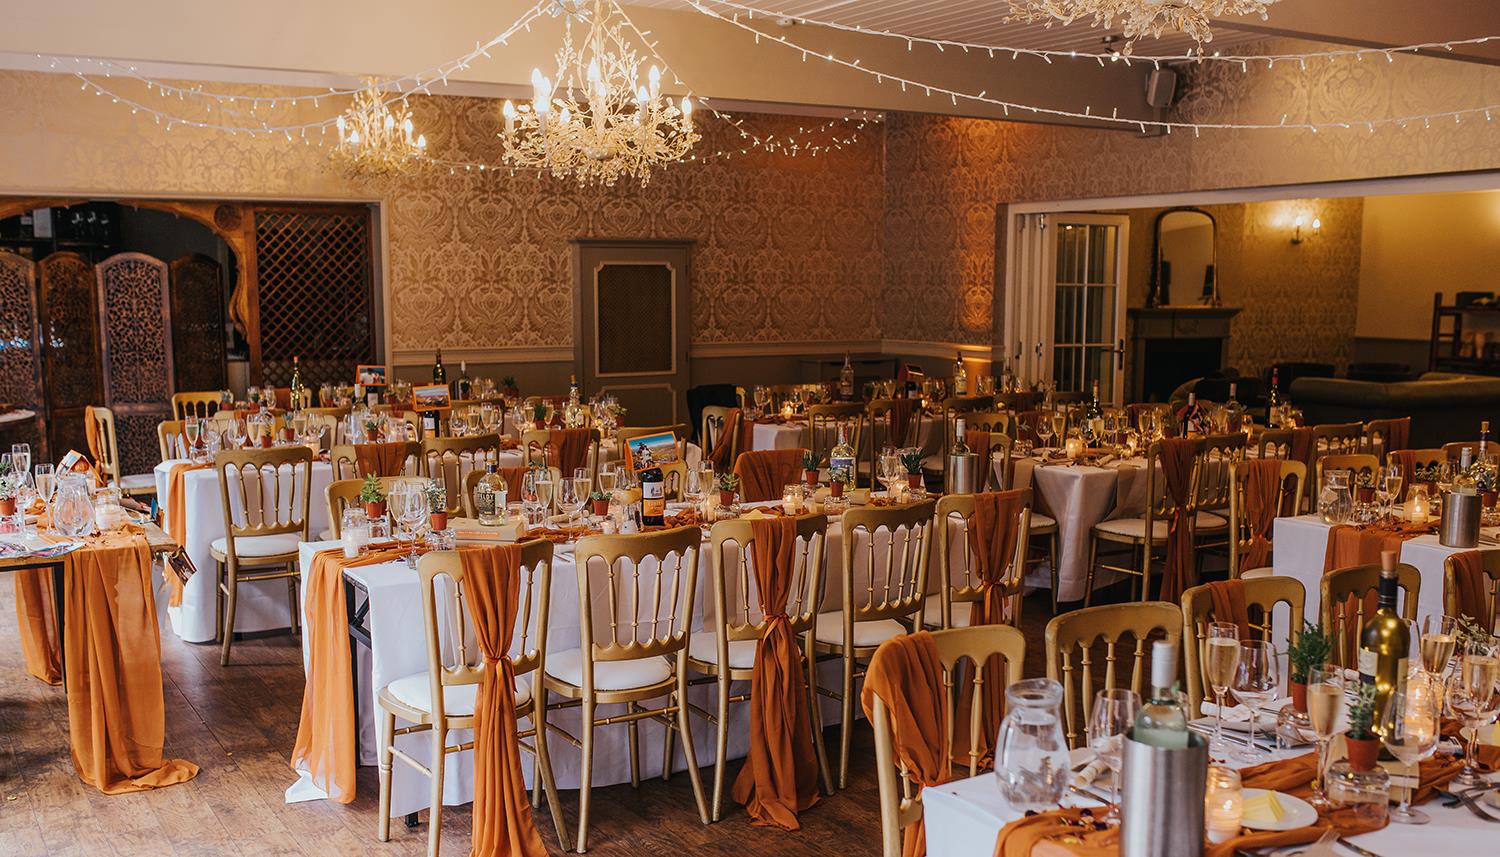 Tables ready for guests. Photo Credit: Charlie Bluck Photography